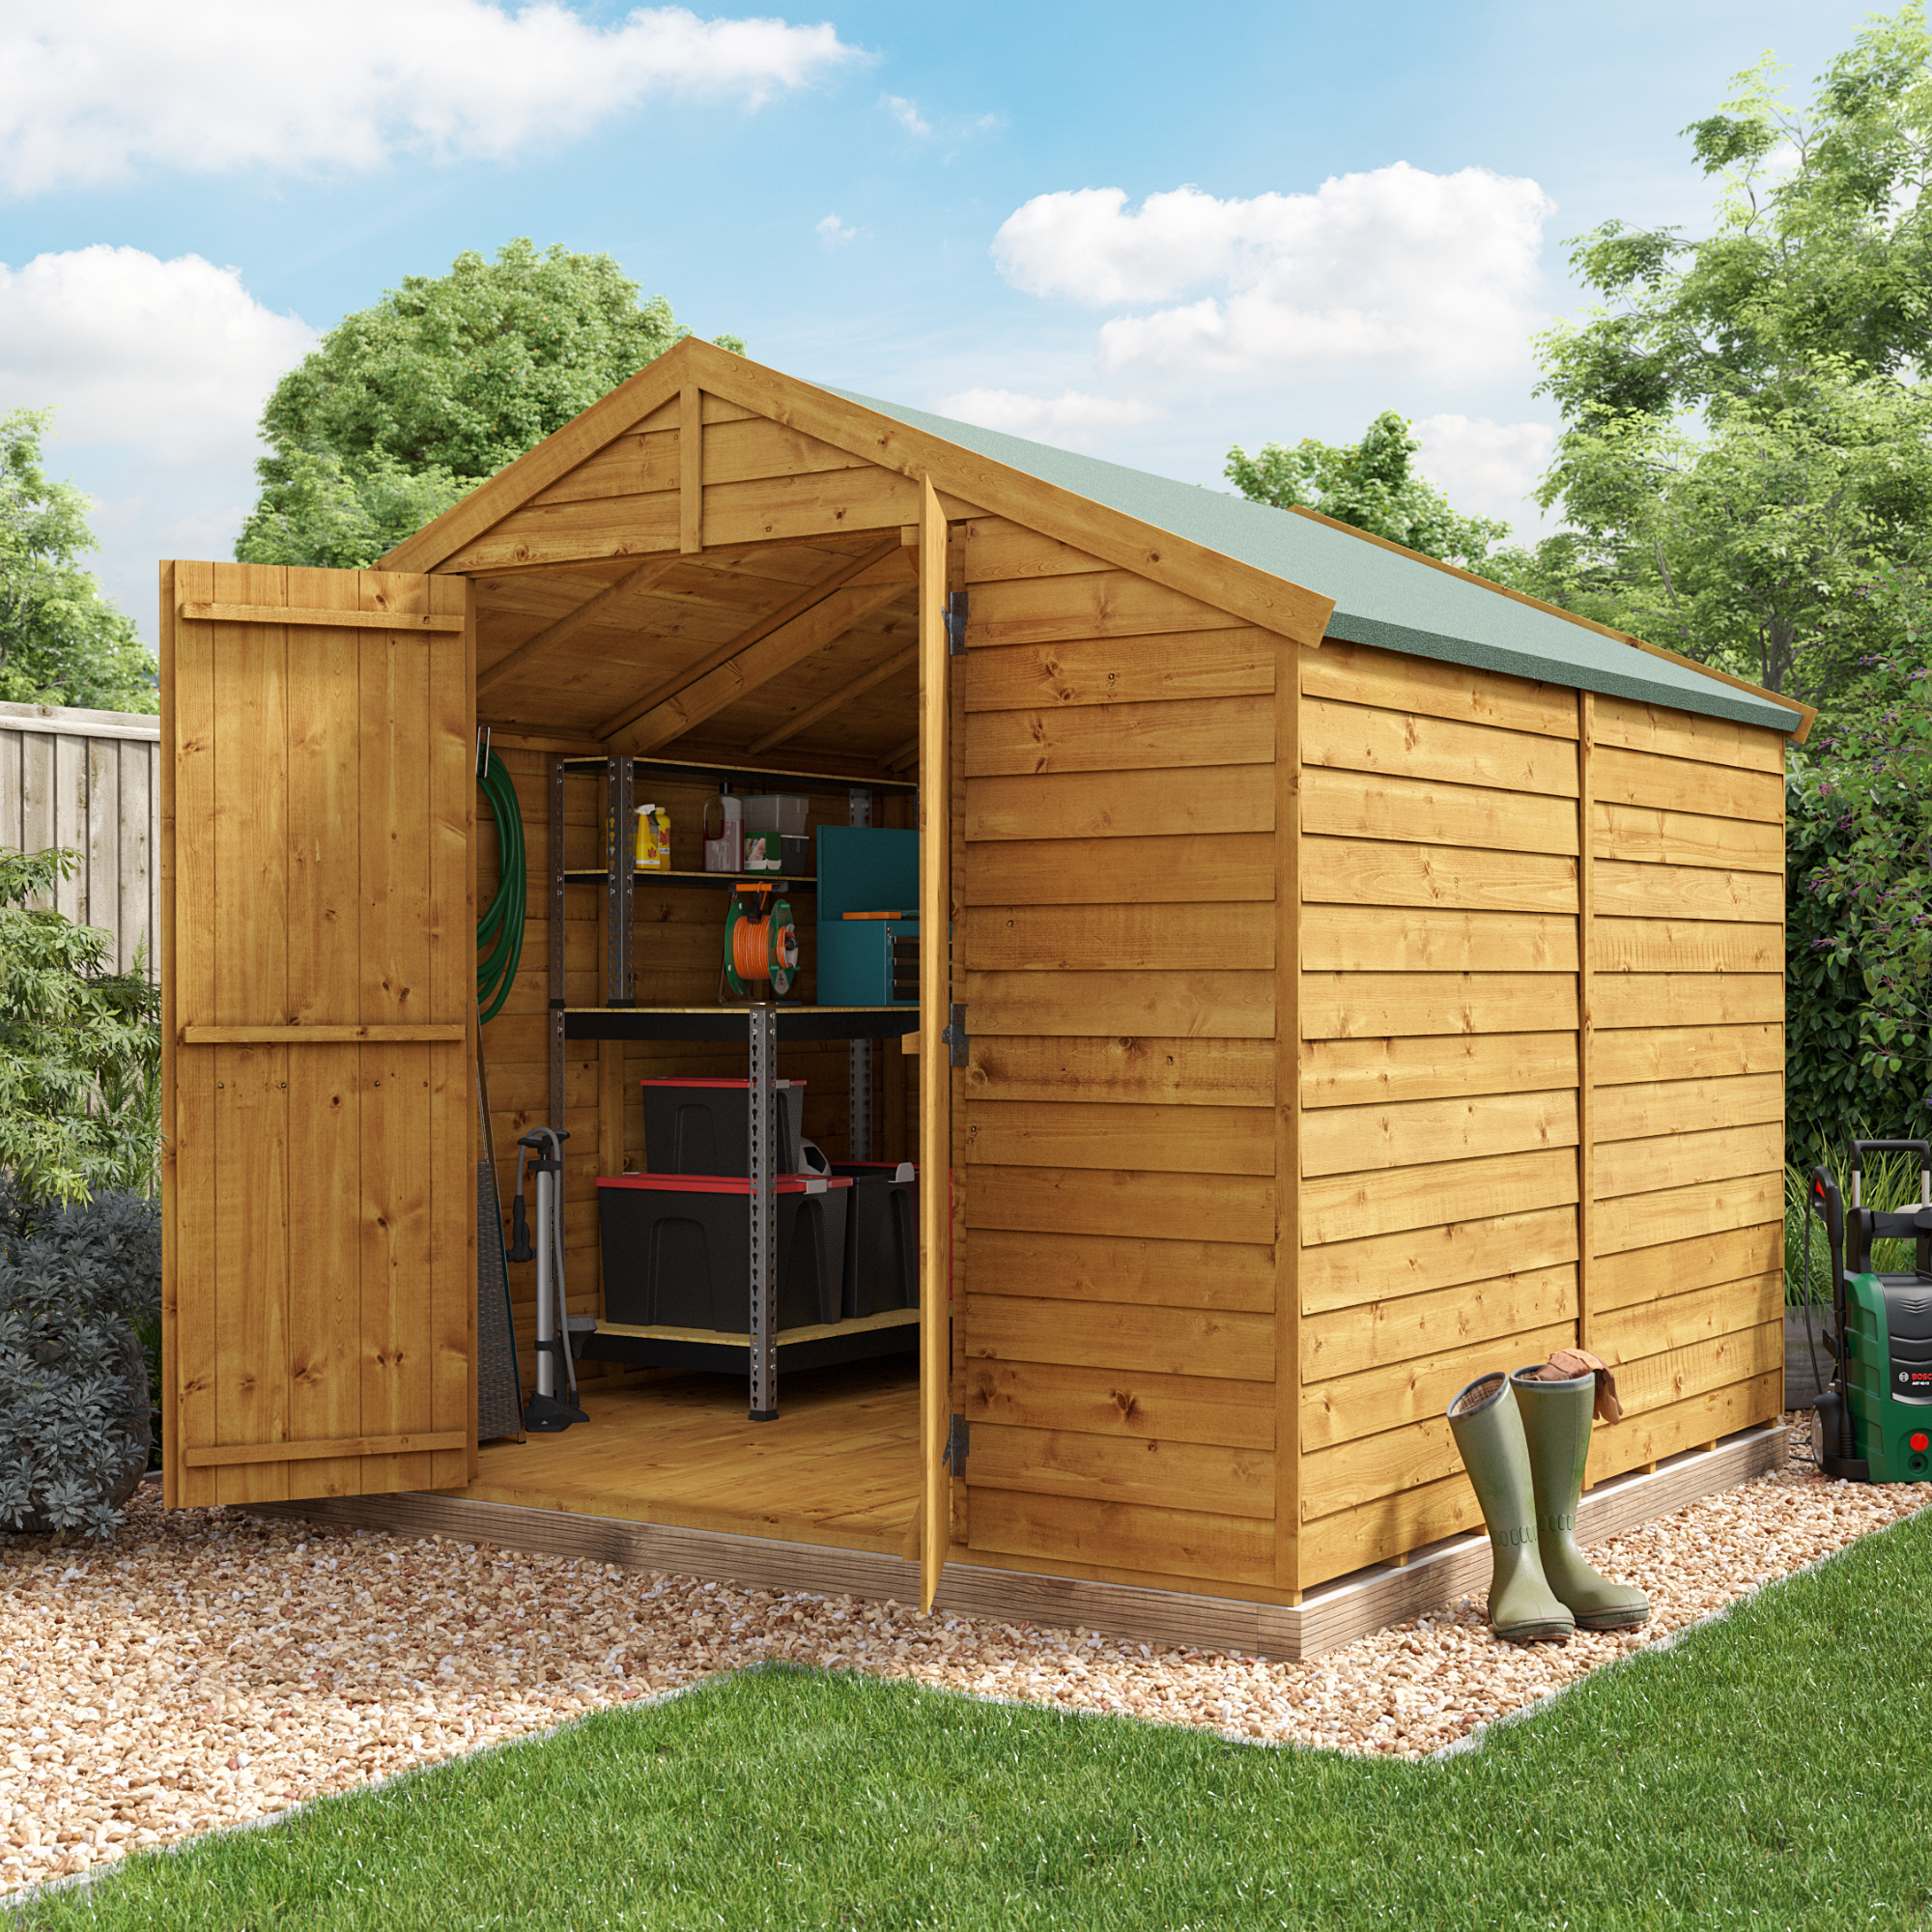 8 x 8 Shed - BillyOh Keeper Overlap Apex Wooden Shed - Windowless 8x8 Garden Shed